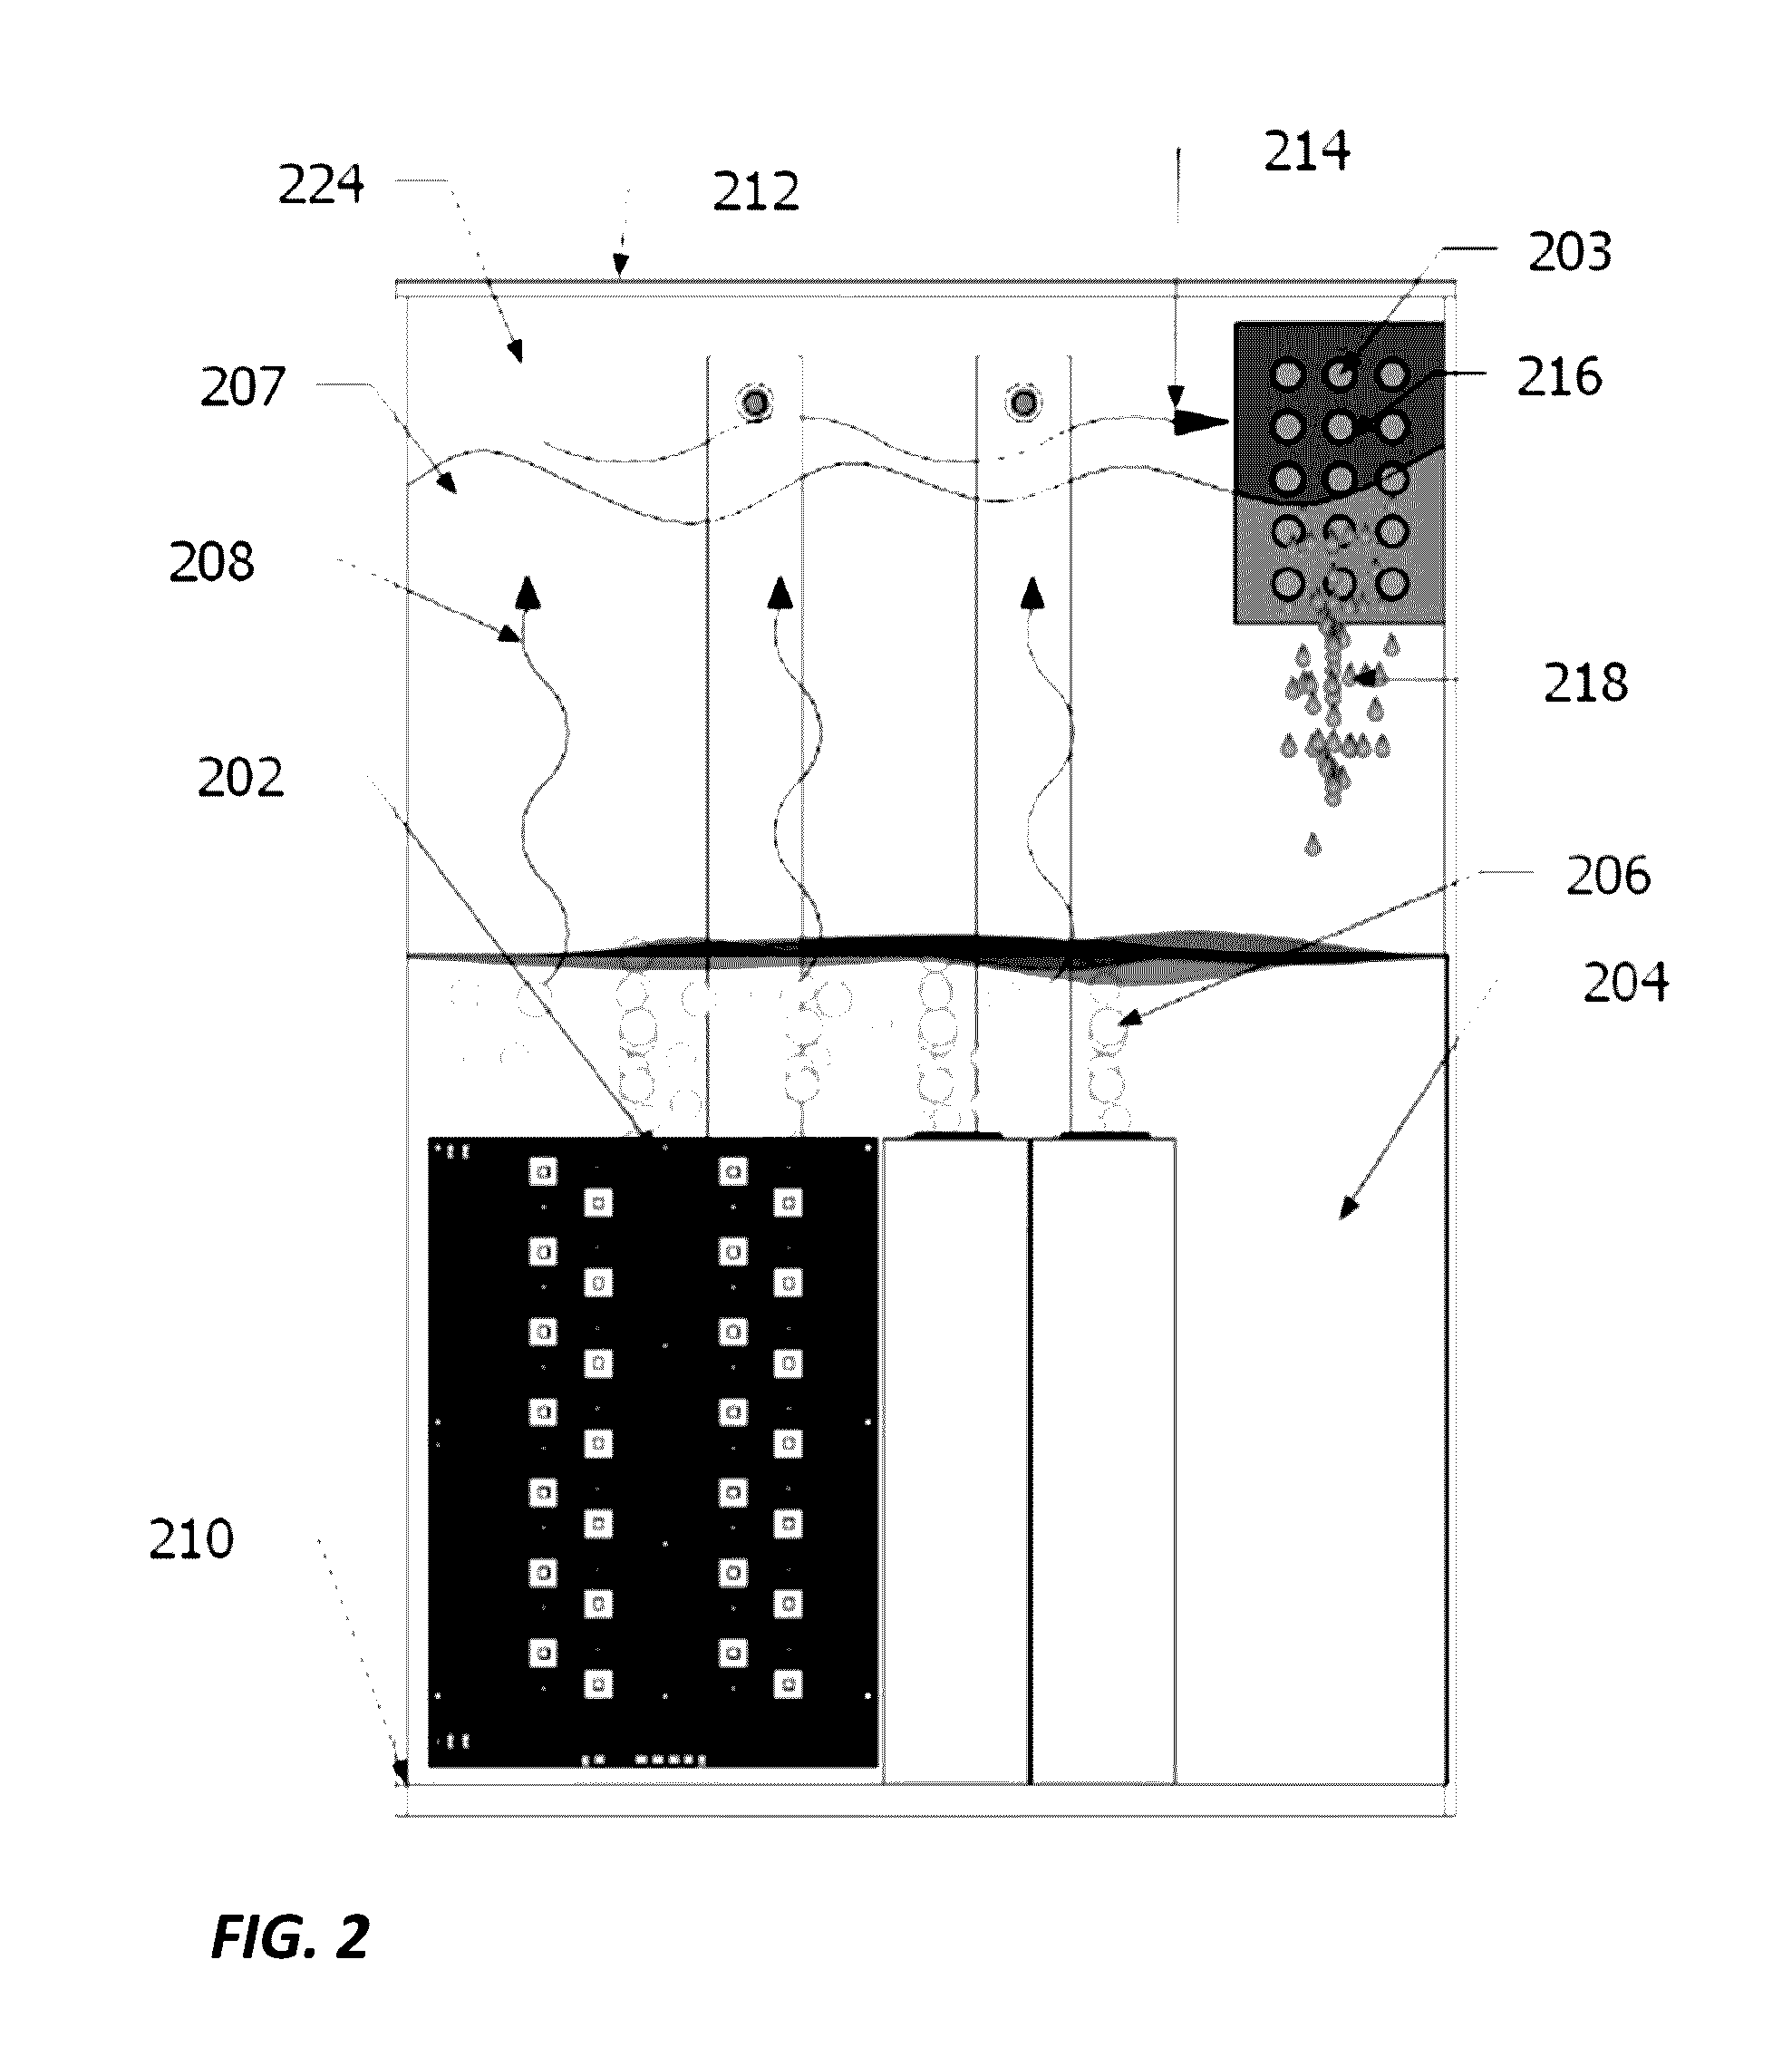 Immersion cooling system with low fluid loss